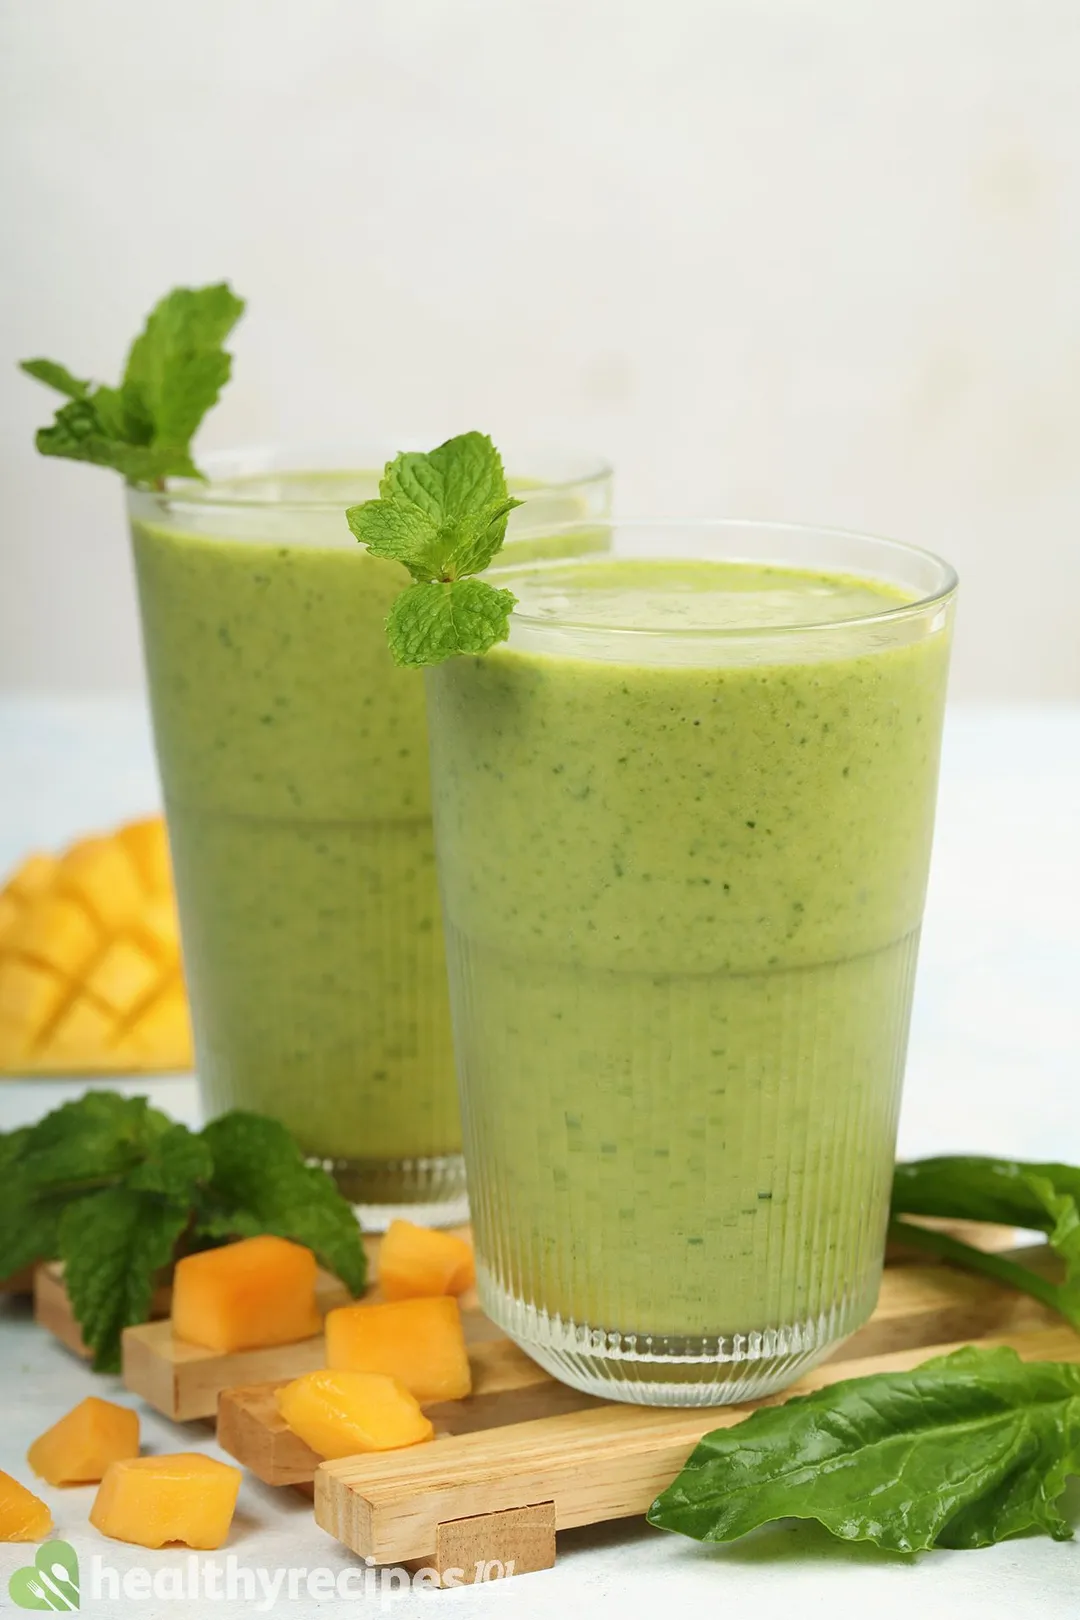 Two glasses of Mango Spinach Smoothie placed on a wooden board near fresh spinach and cubed mangoes.